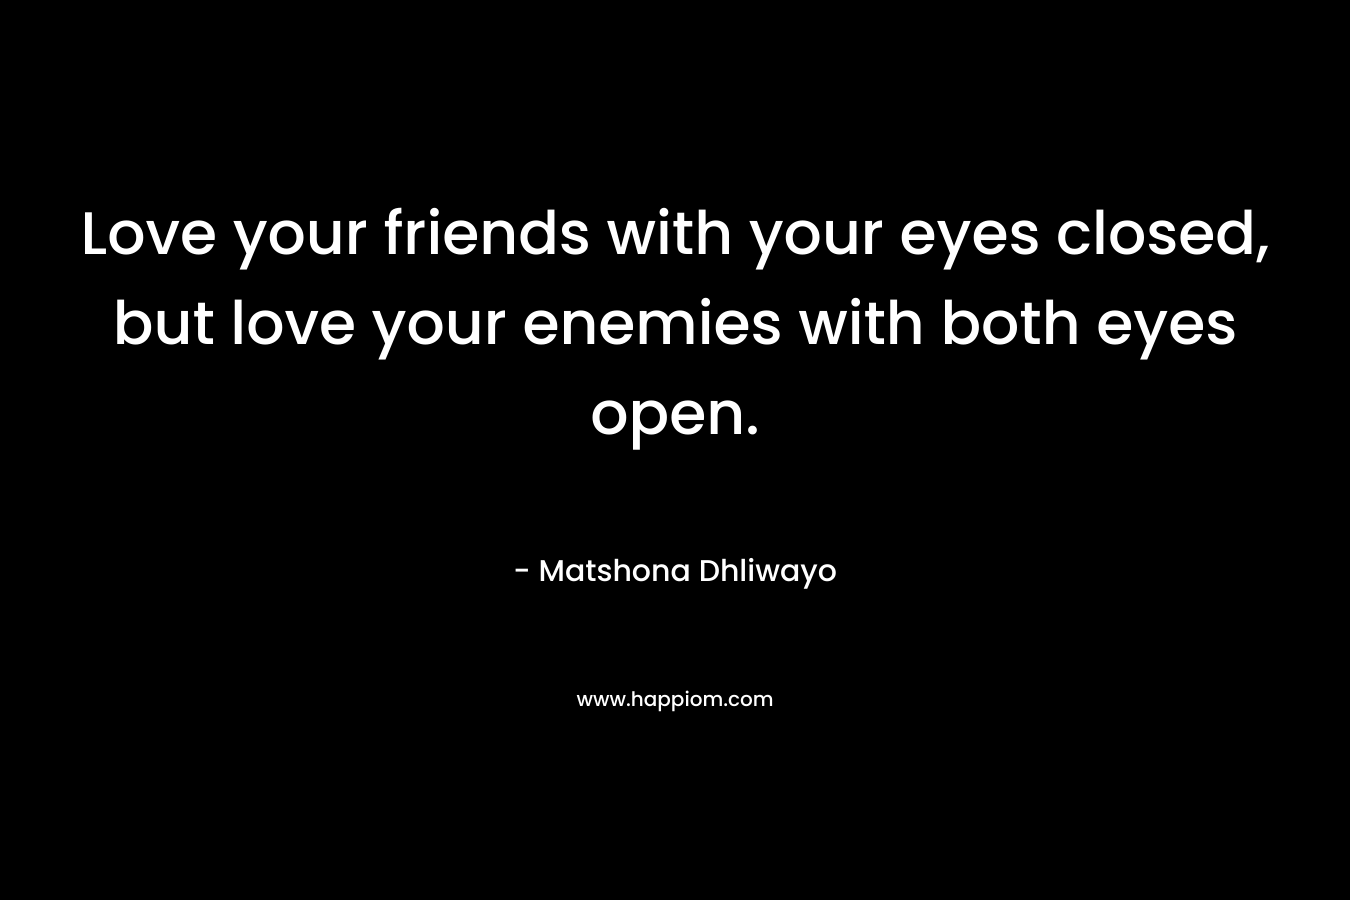 Love your friends with your eyes closed, but love your enemies with both eyes open.